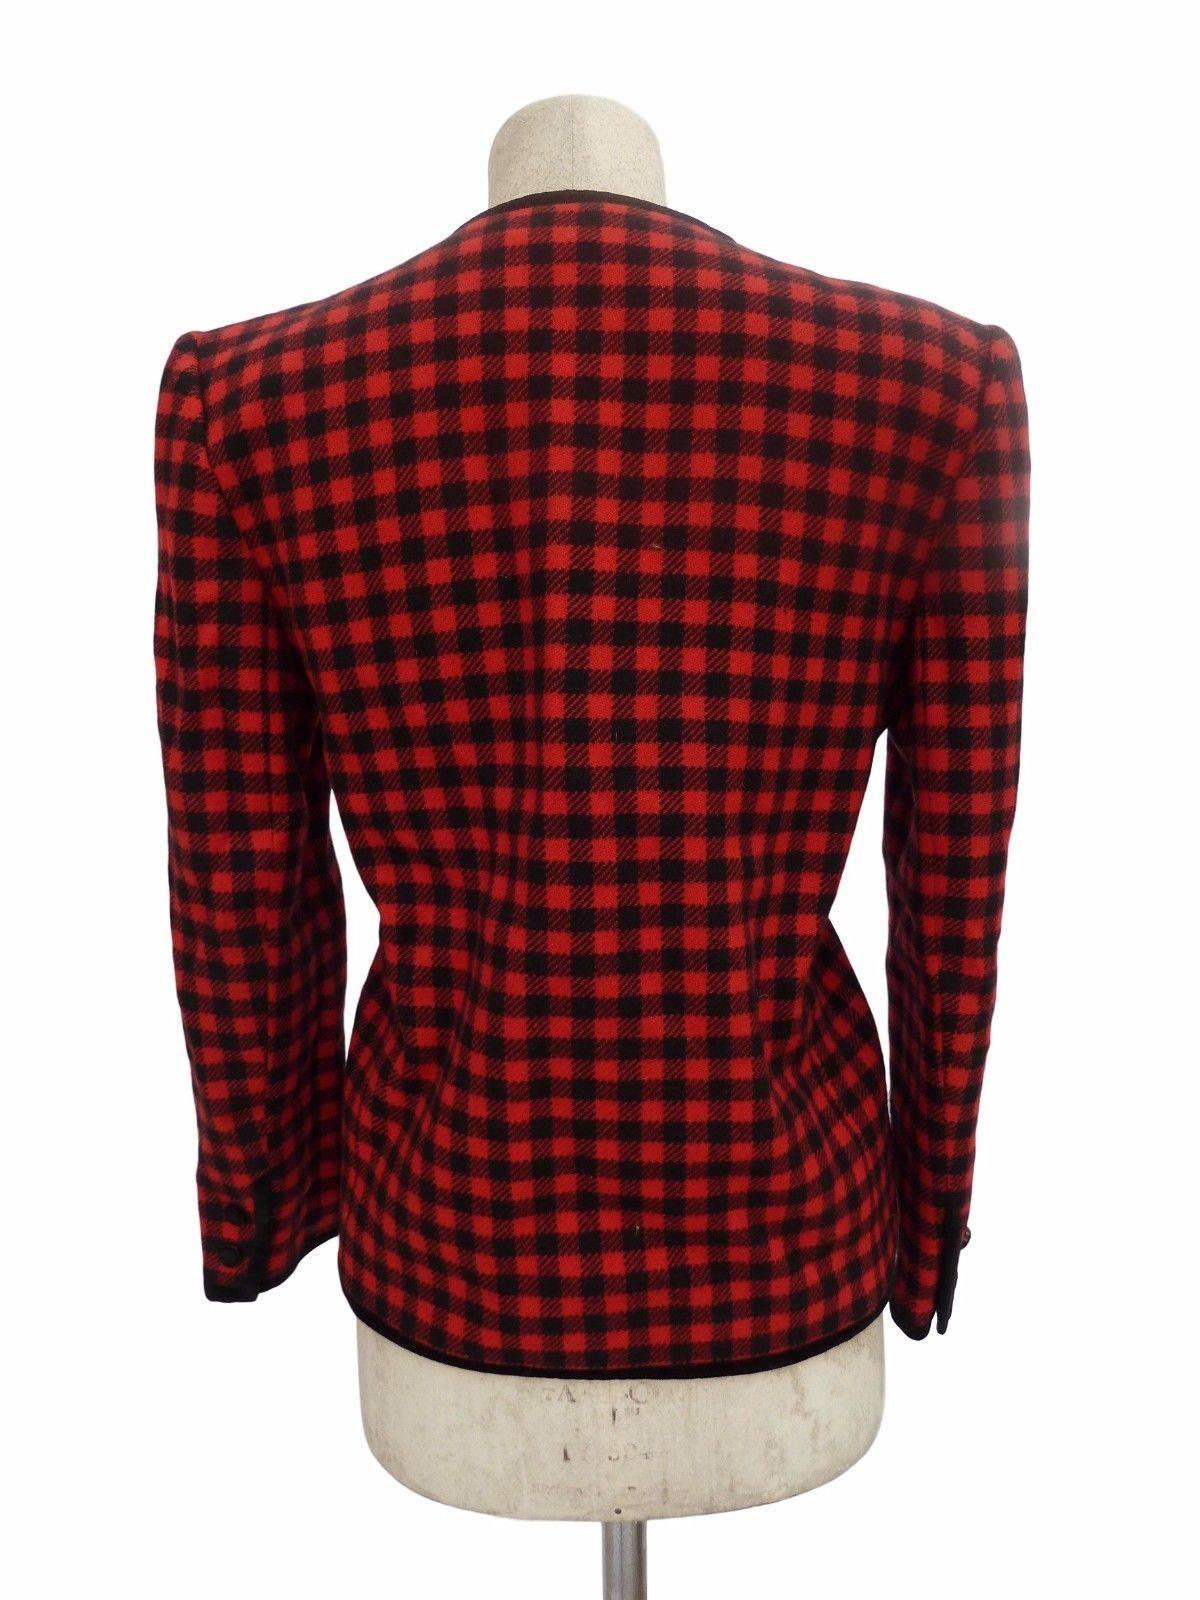 Valentino Boutique Vintage 80s wool check jacket Black and red 100% wool Size 40 In Excellent Condition For Sale In Brindisi, IT